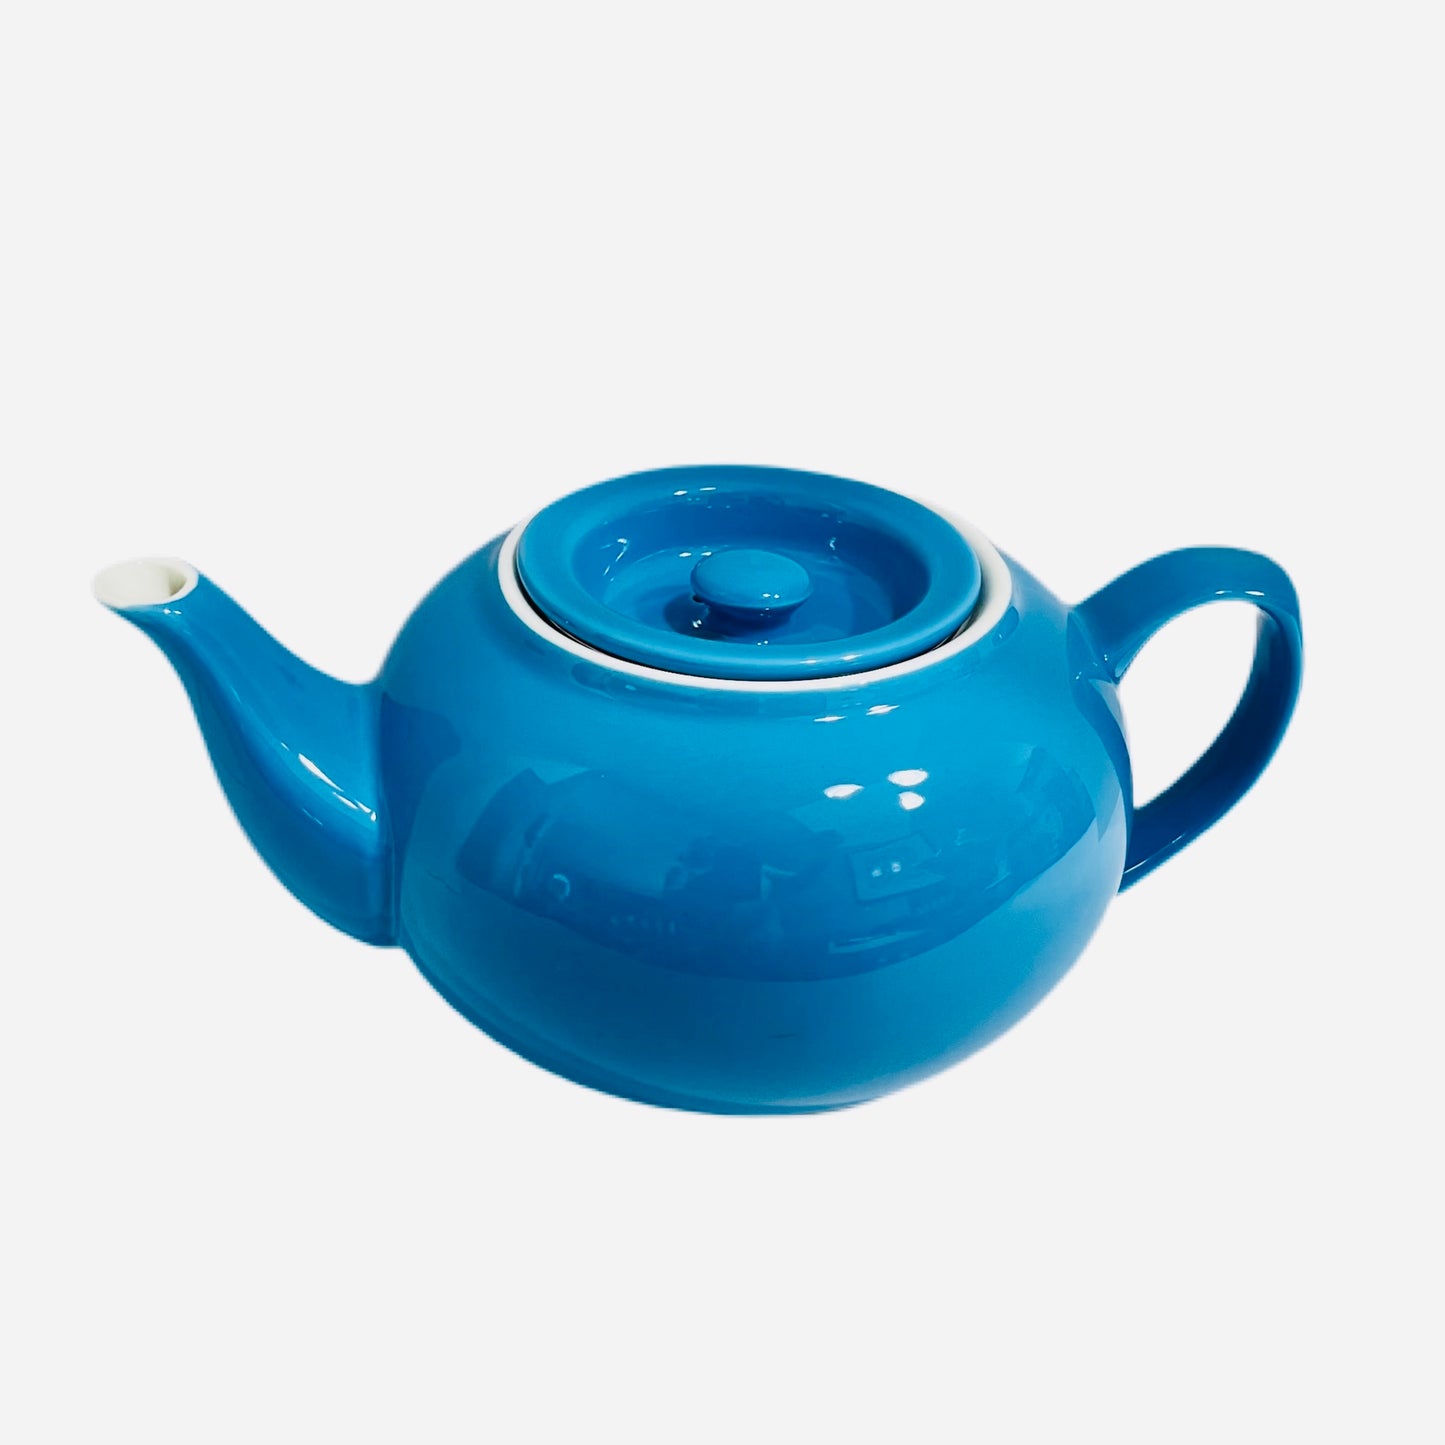 Porcelain Teapot and infuser